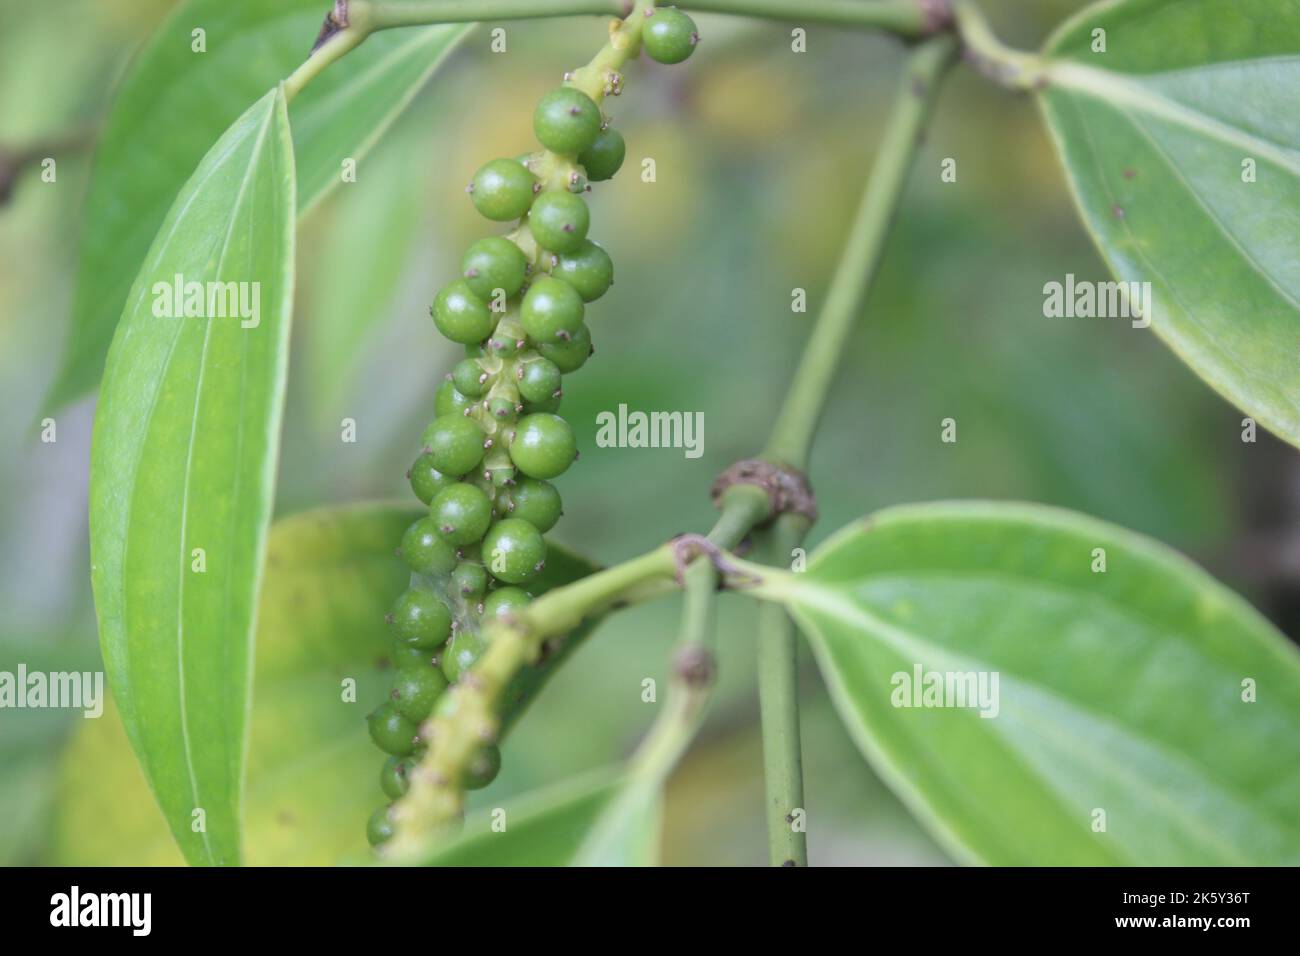 Selective focus of pepper plants (sahang) in garden. Blurred background. Used for cooking spices. Its scientific name is Piper Nigrum. Stock Photo